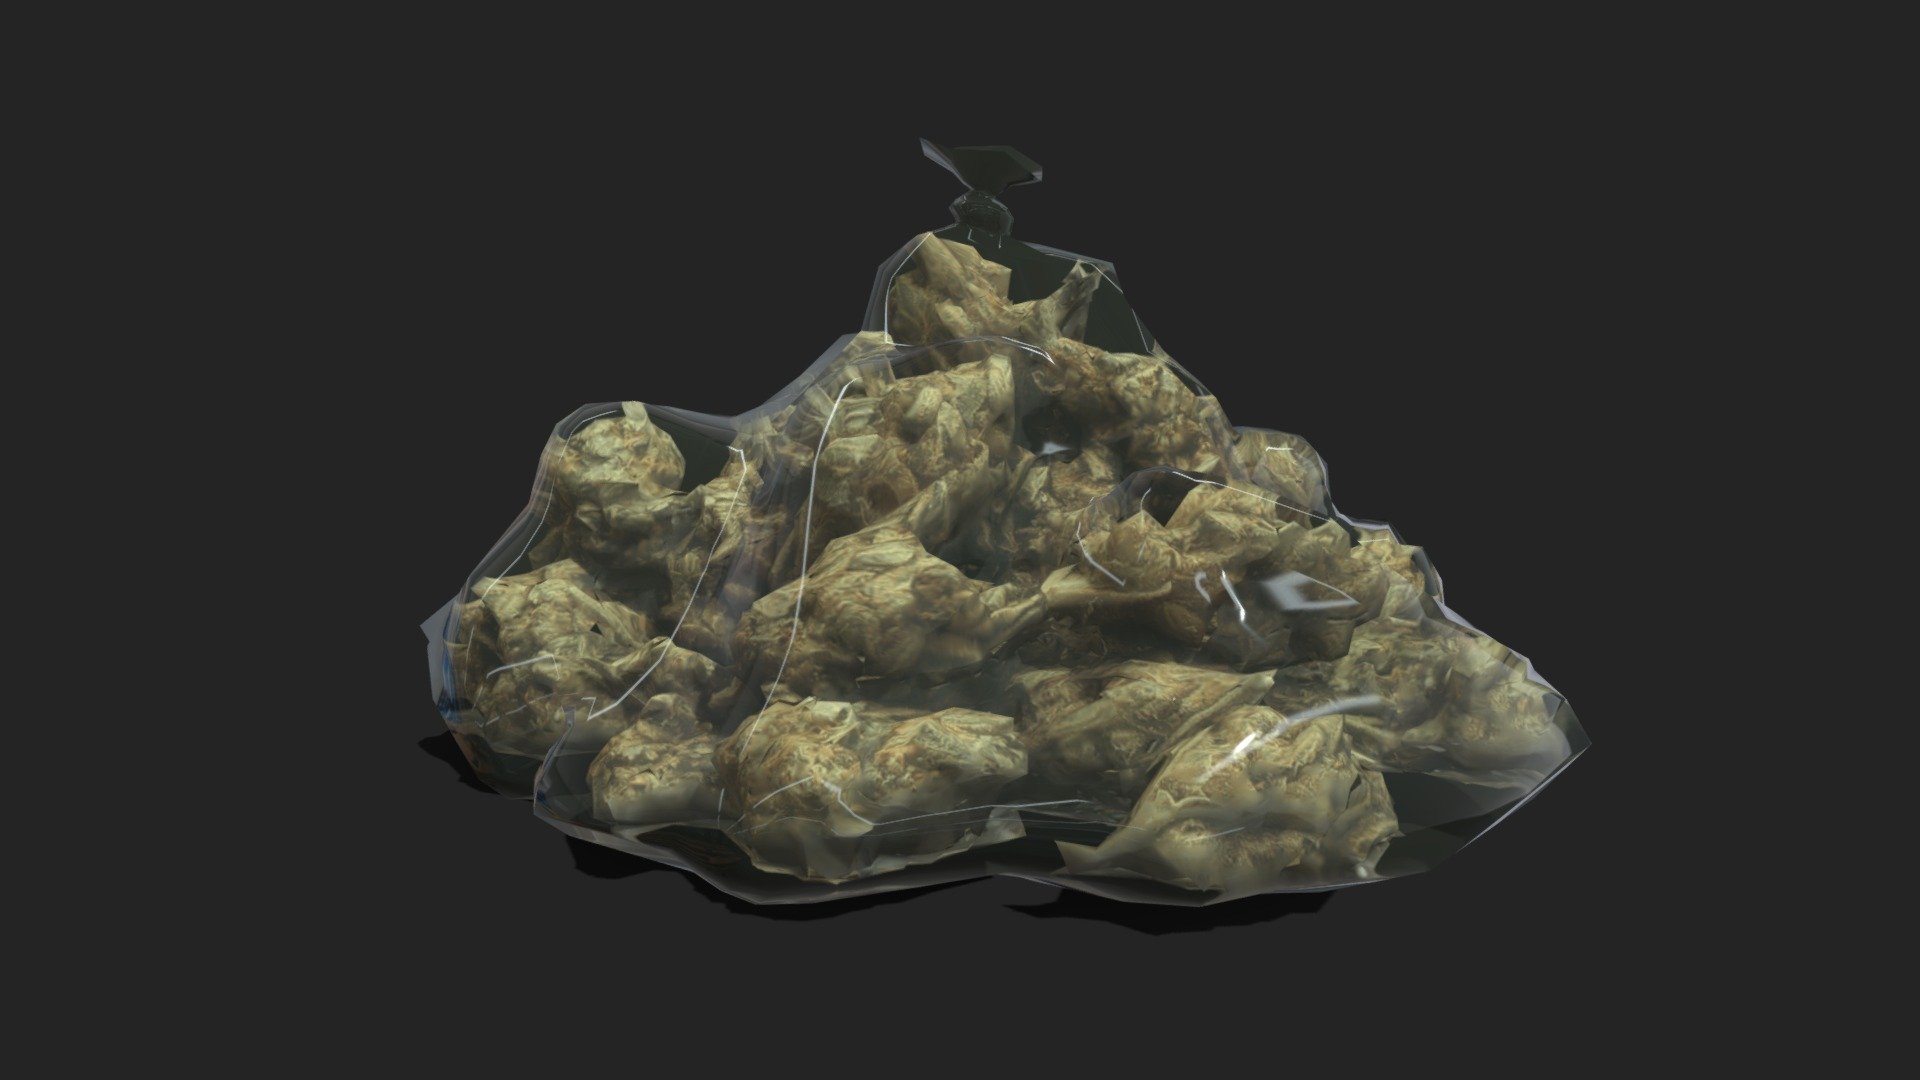 Low Poly Large Weed Pouch 3d asset. Made from &ldquo;Weed Whatever Platter